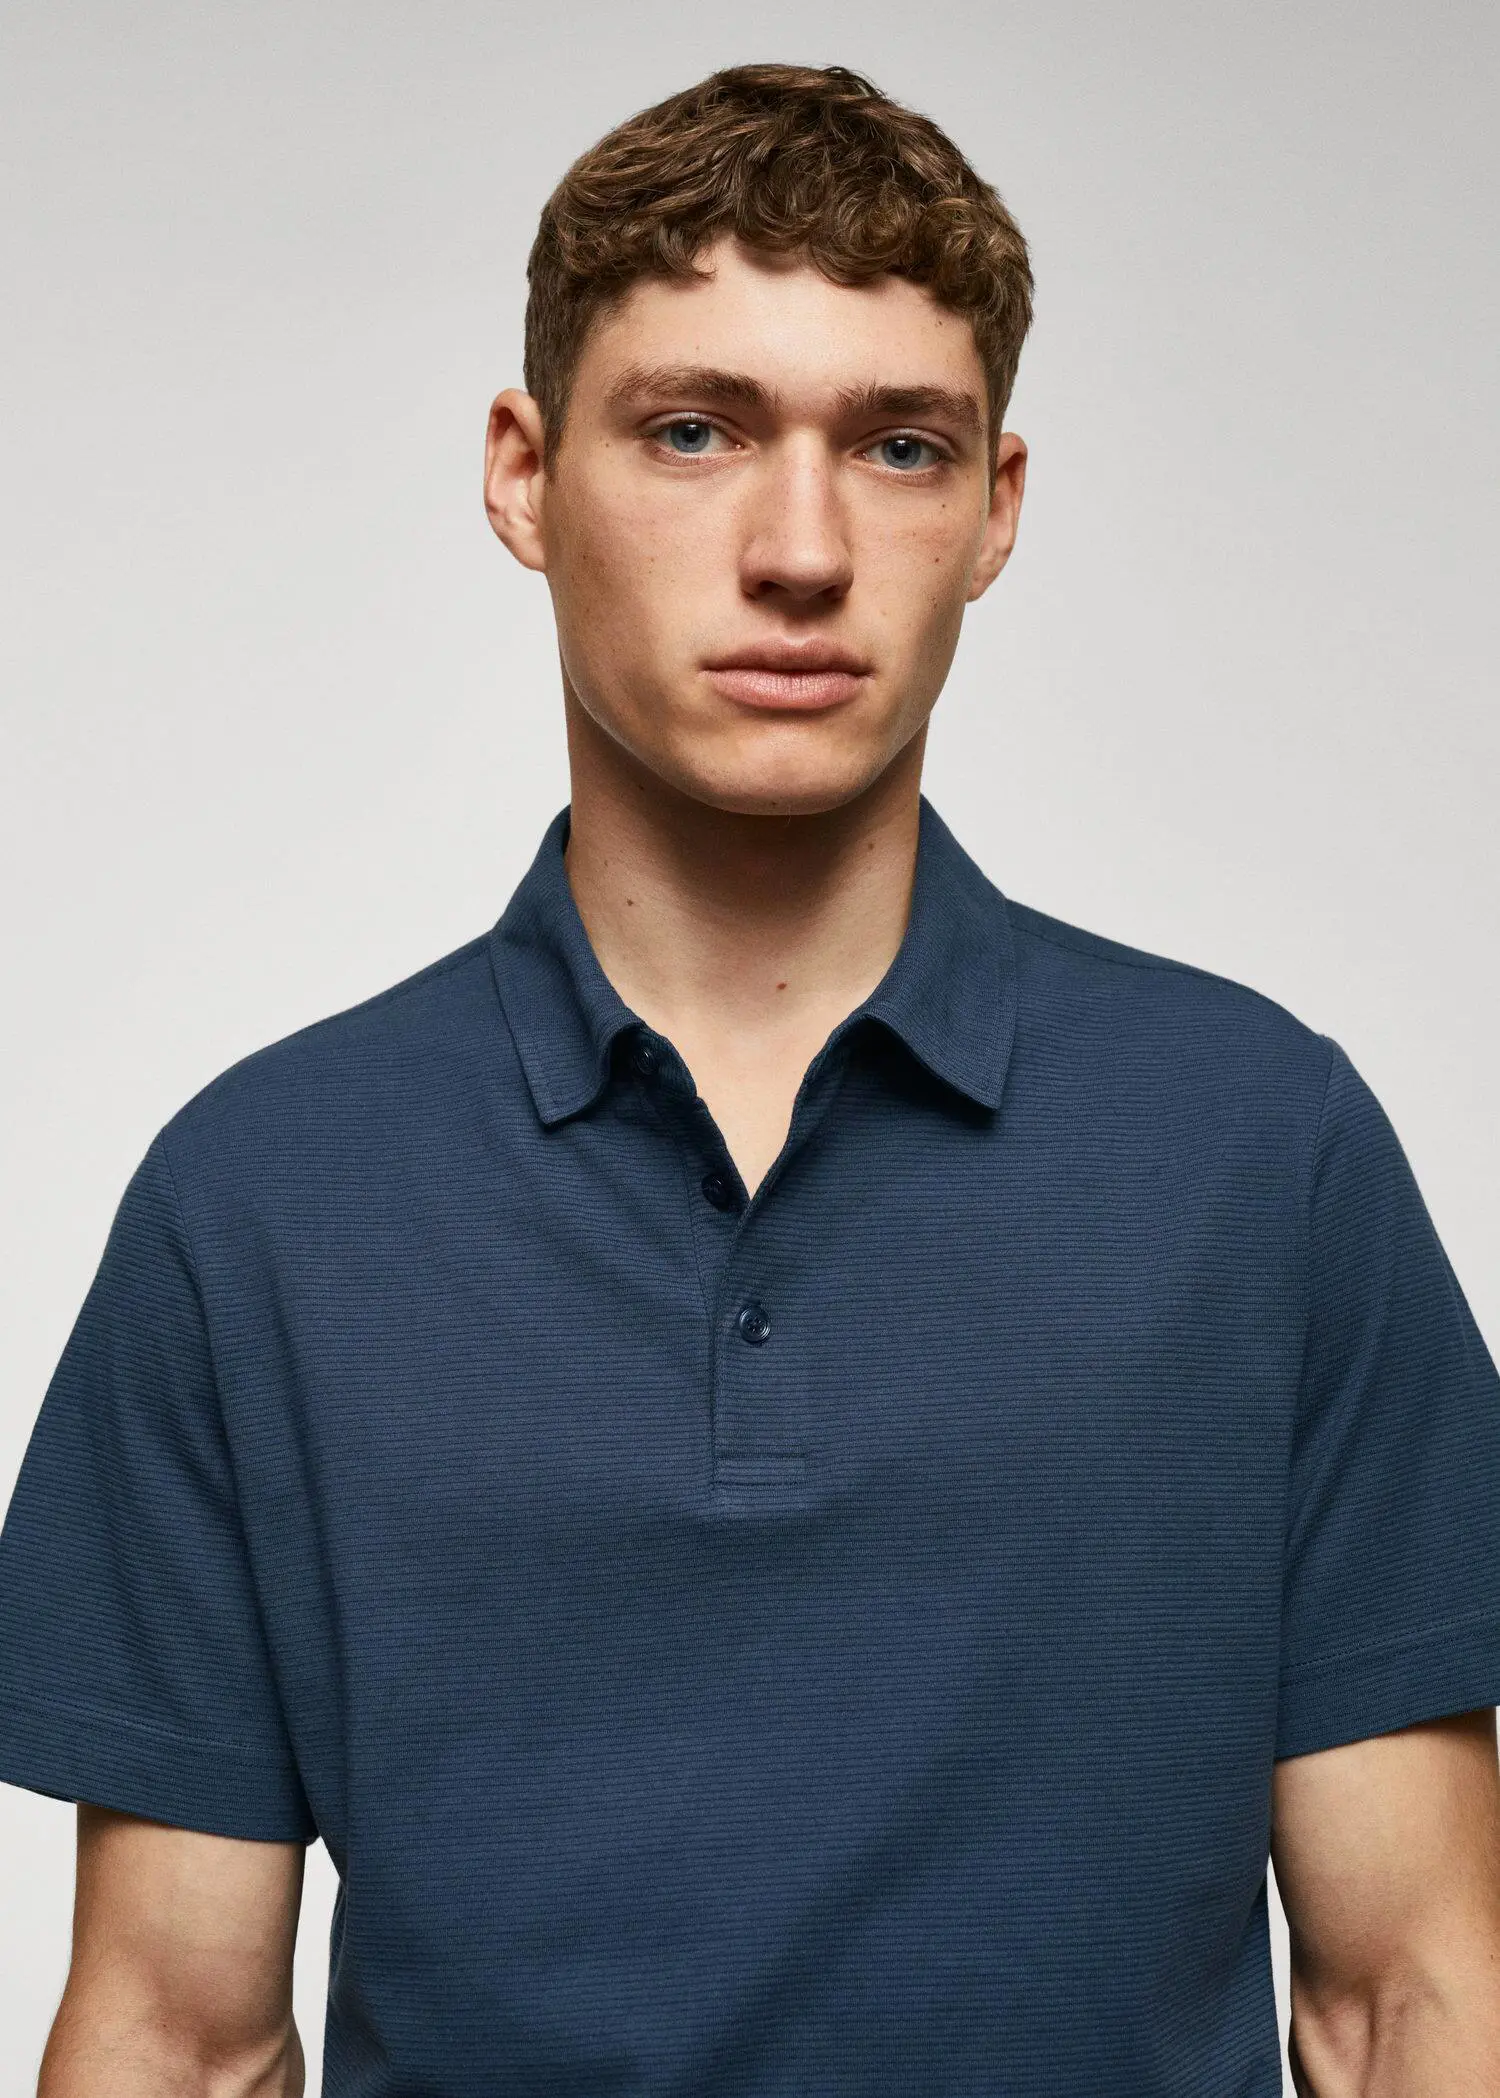 Mango 100% cotton polo shirt with striped structure. a young man wearing a blue polo shirt. 